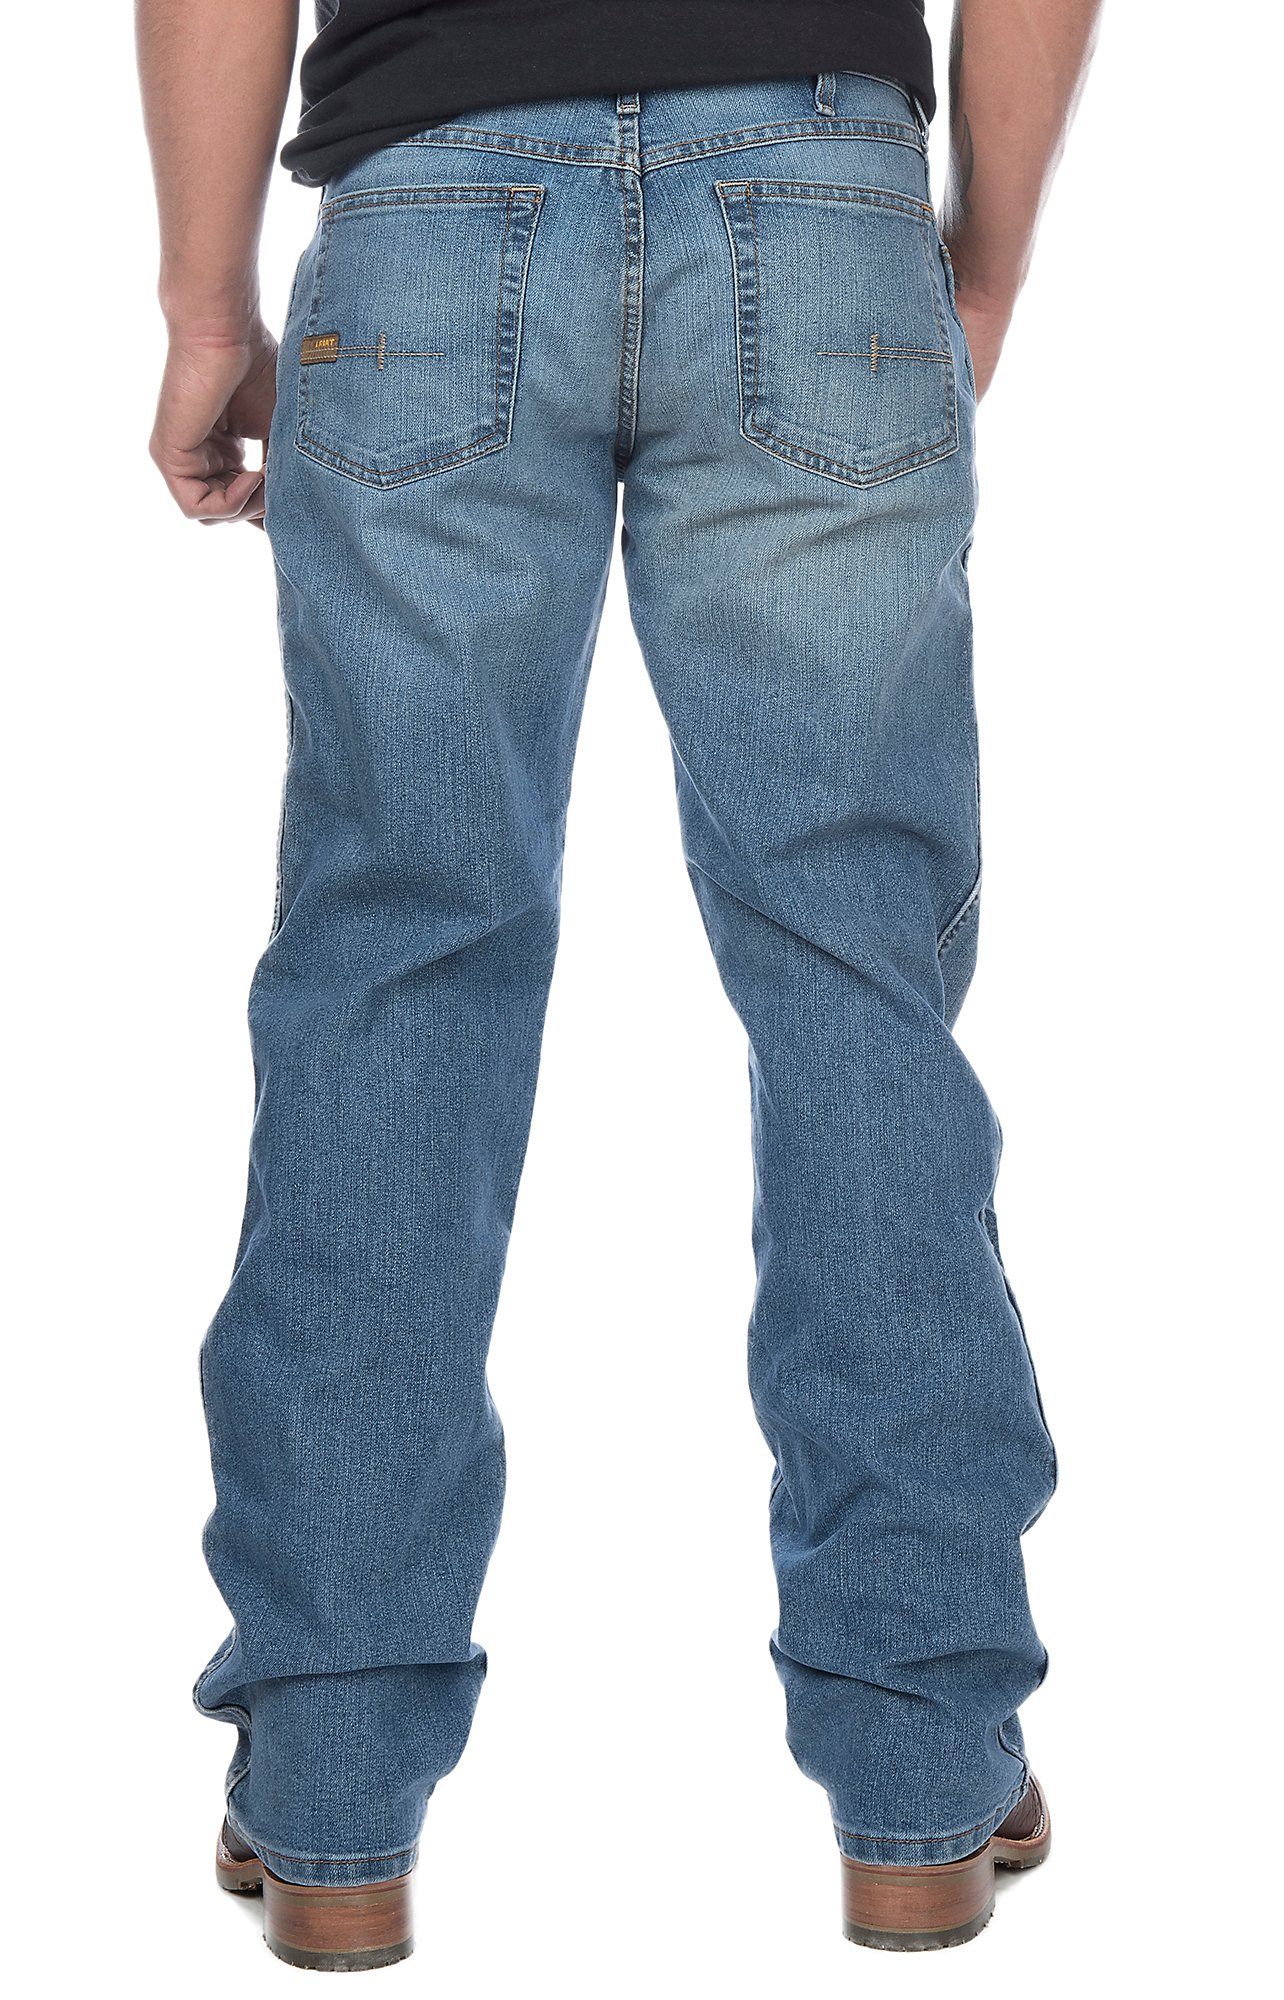 Western Jeans and Western Pants for Men | Cavender's